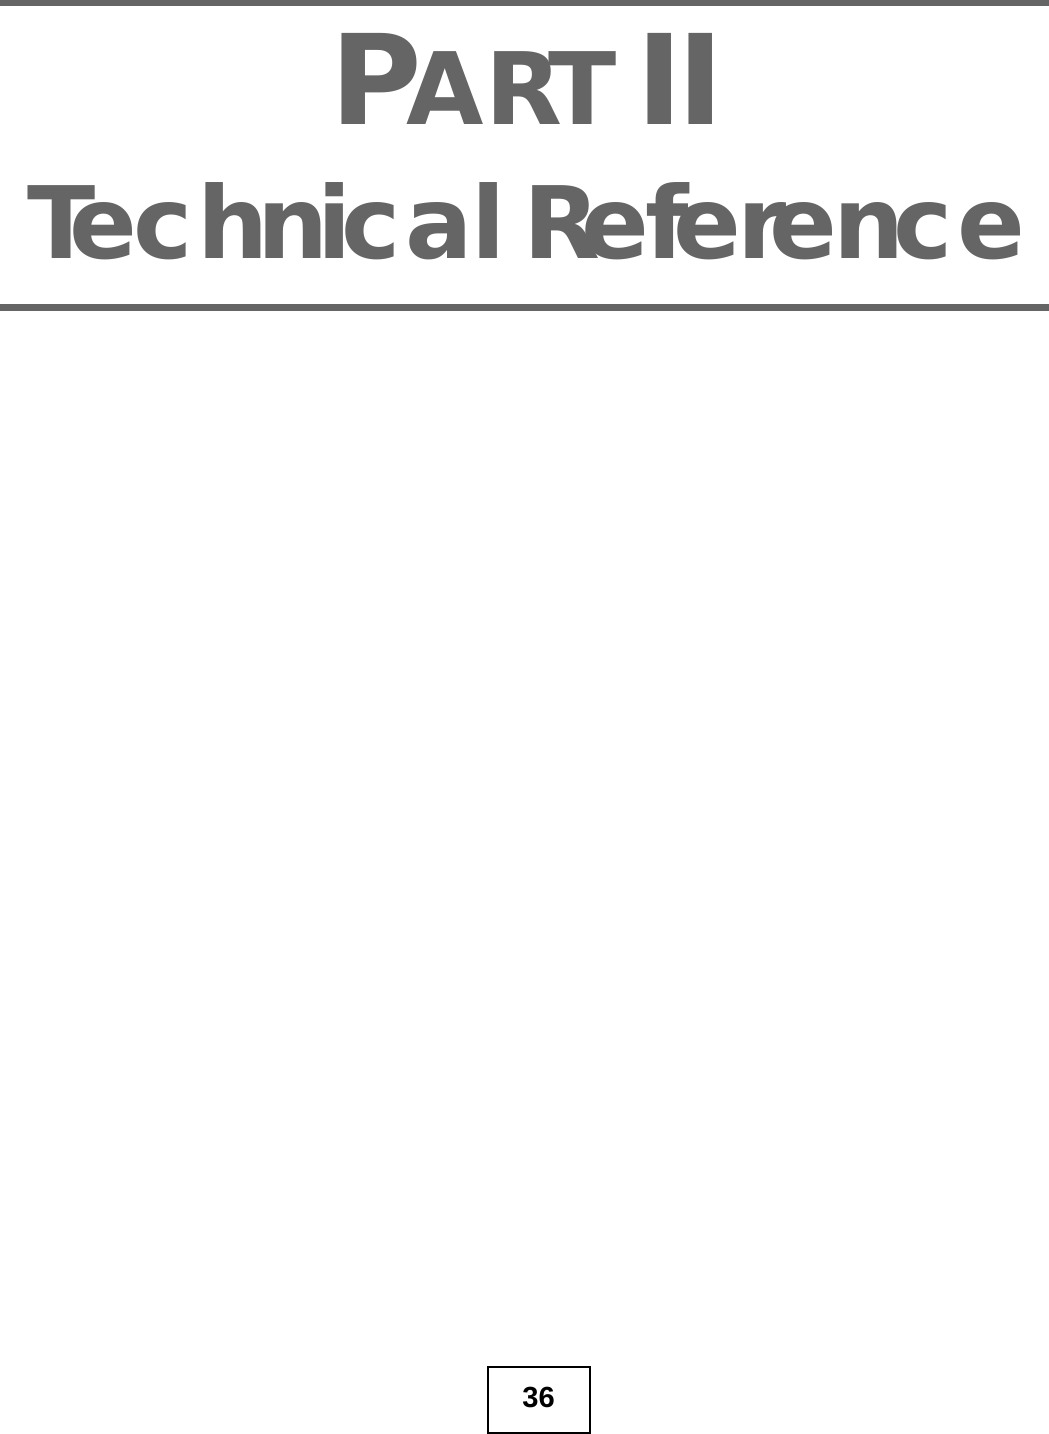 36PART IITechnical Reference